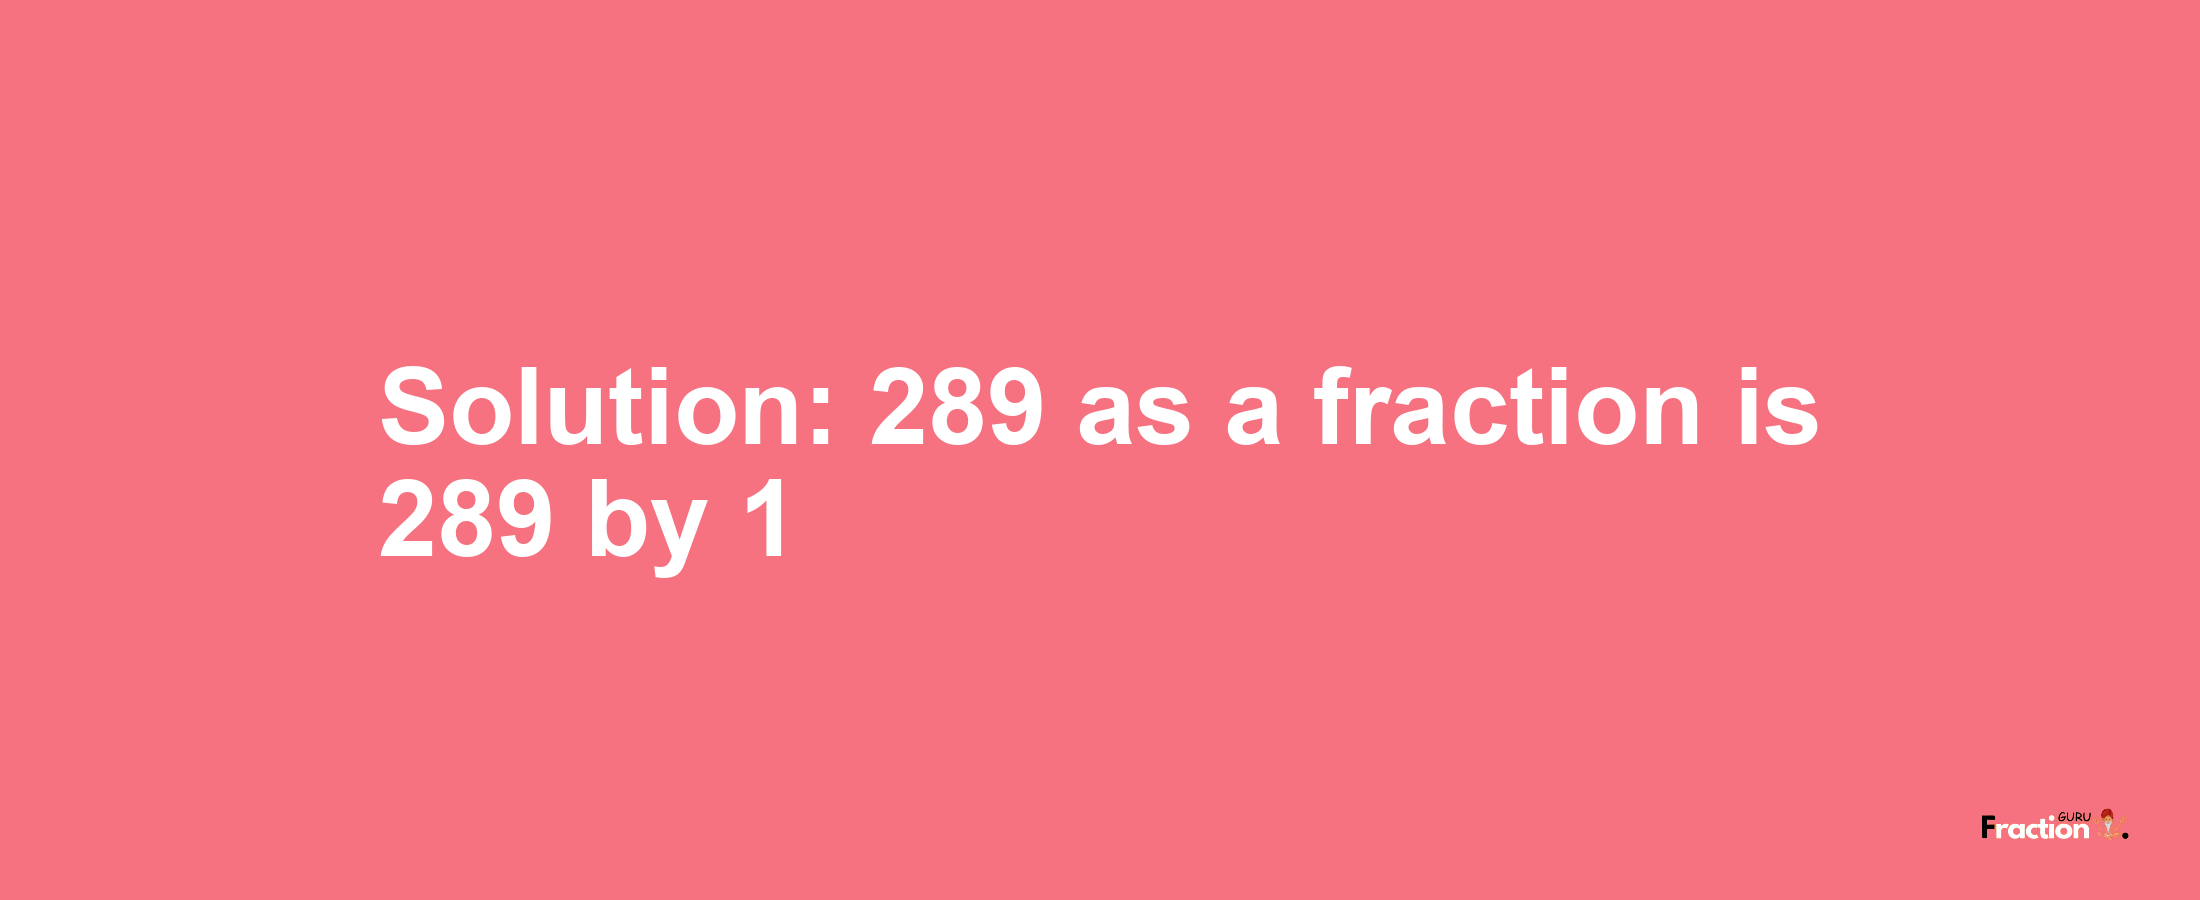 Solution:289 as a fraction is 289/1